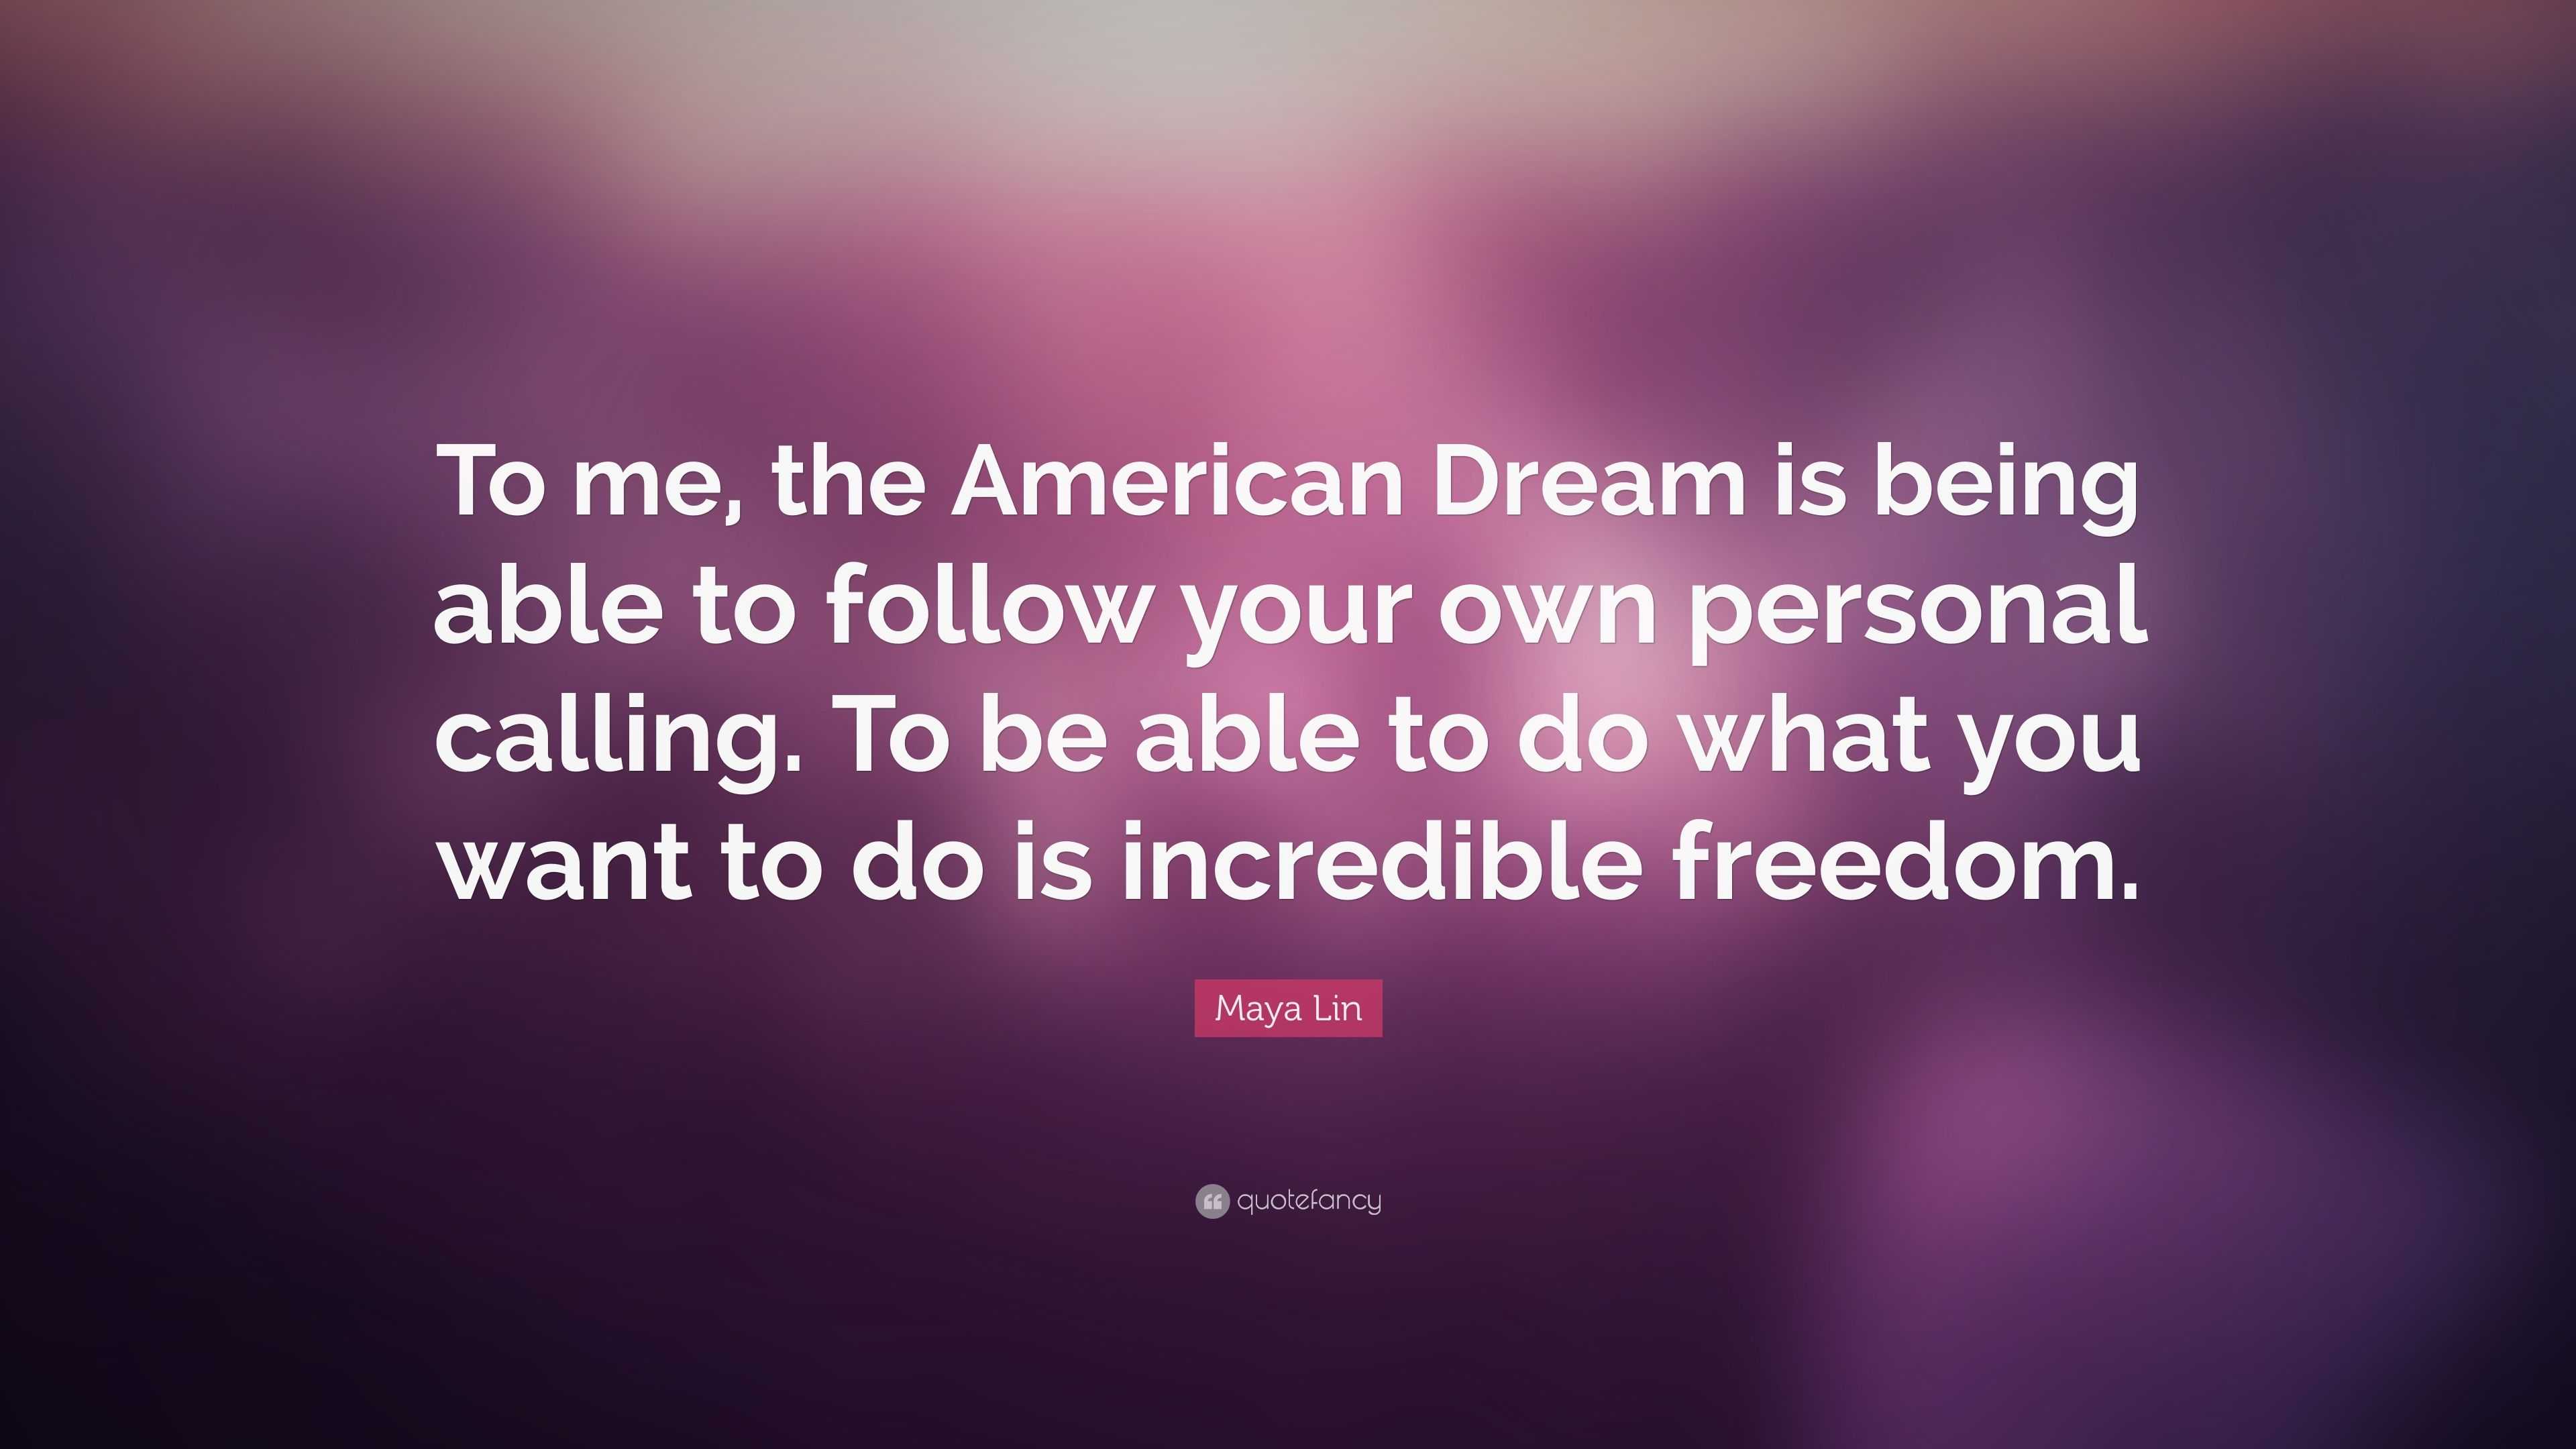 Maya Lin Quote: “To me, the American Dream is being able to follow your ...